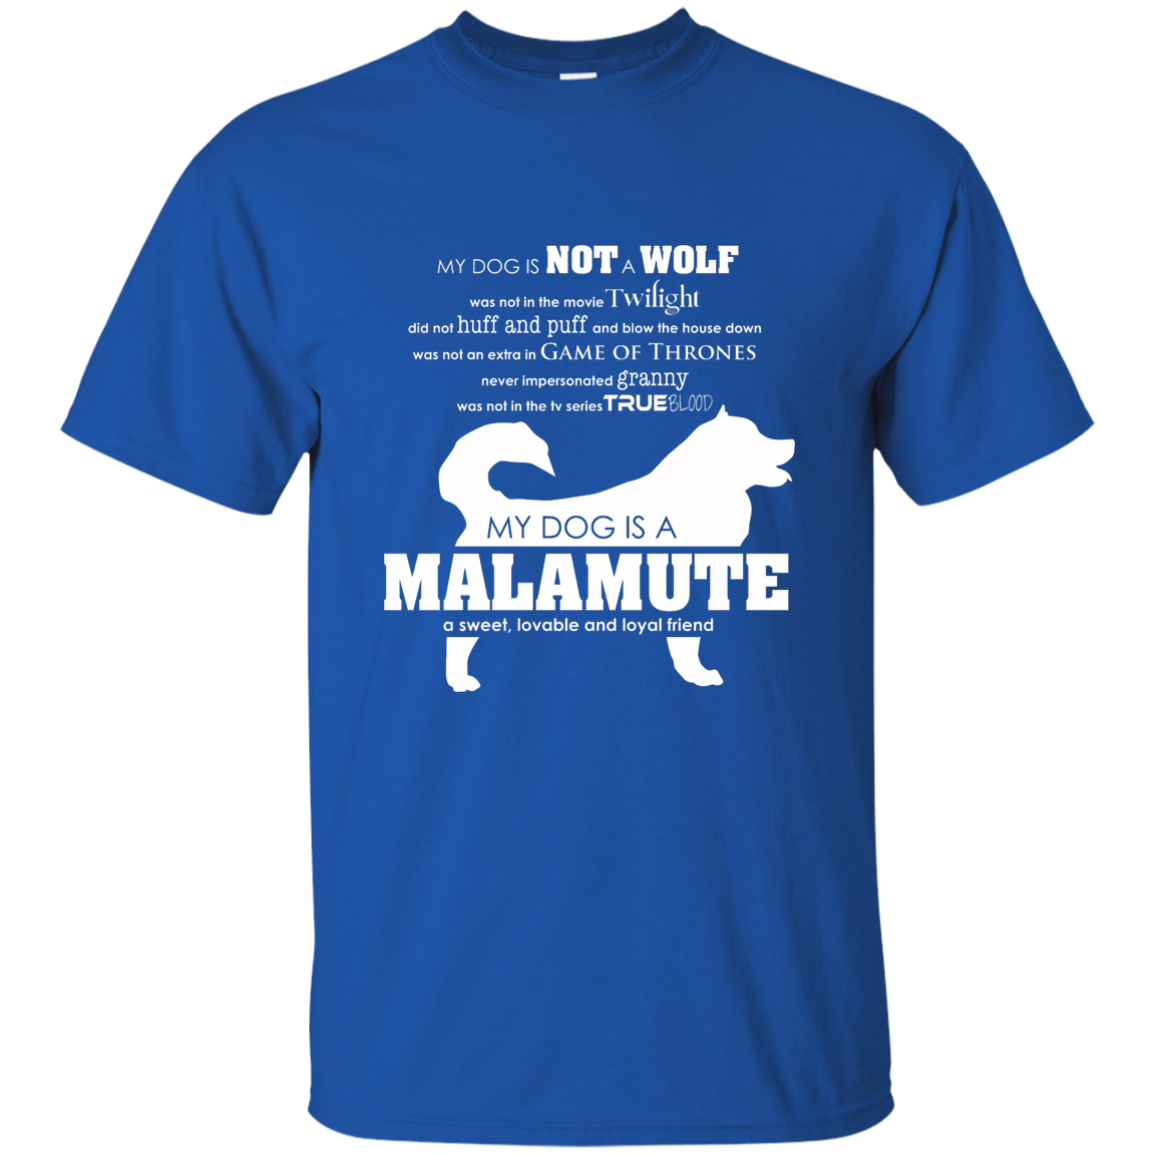 My Dog is Not a Wolf, My Dog is a Malamute - T-Shirt